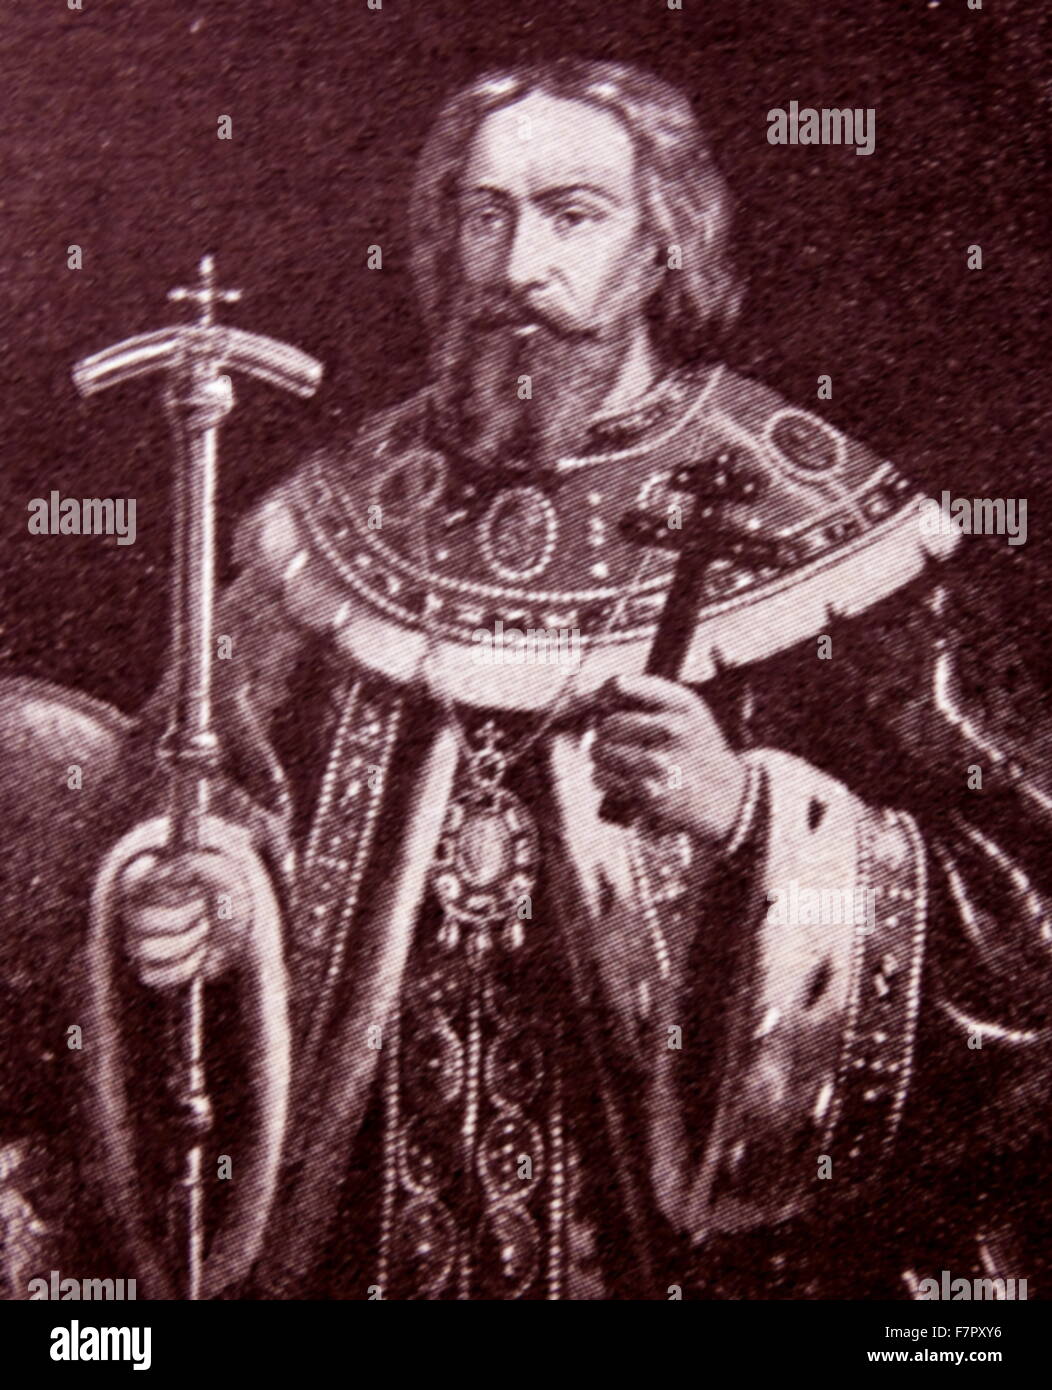 Patriarch Filaret (Feodor Romanov) (1553-1633), patriarch of Moscow from 1612-1633, father of Tsar Michael I of Russia Stock Photo